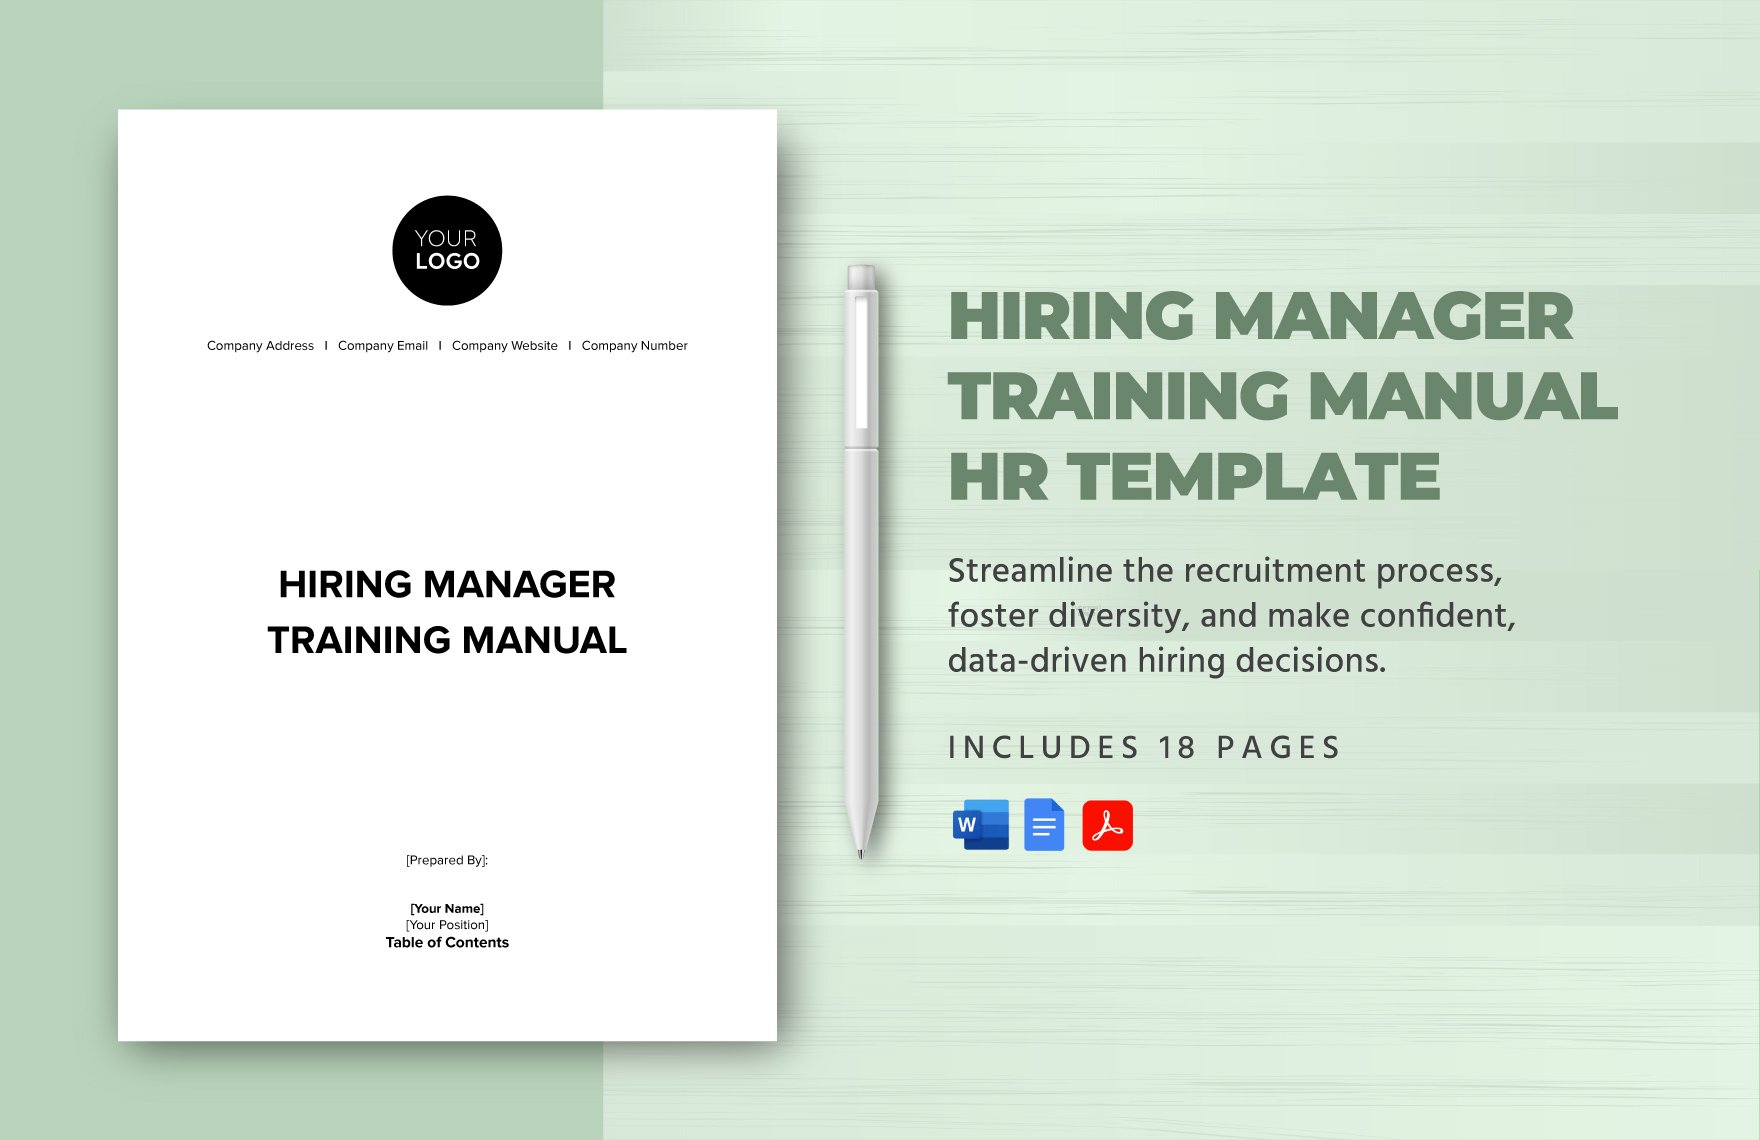 Hiring Manager Training Manual HR Template in Word, Google Docs, PDF